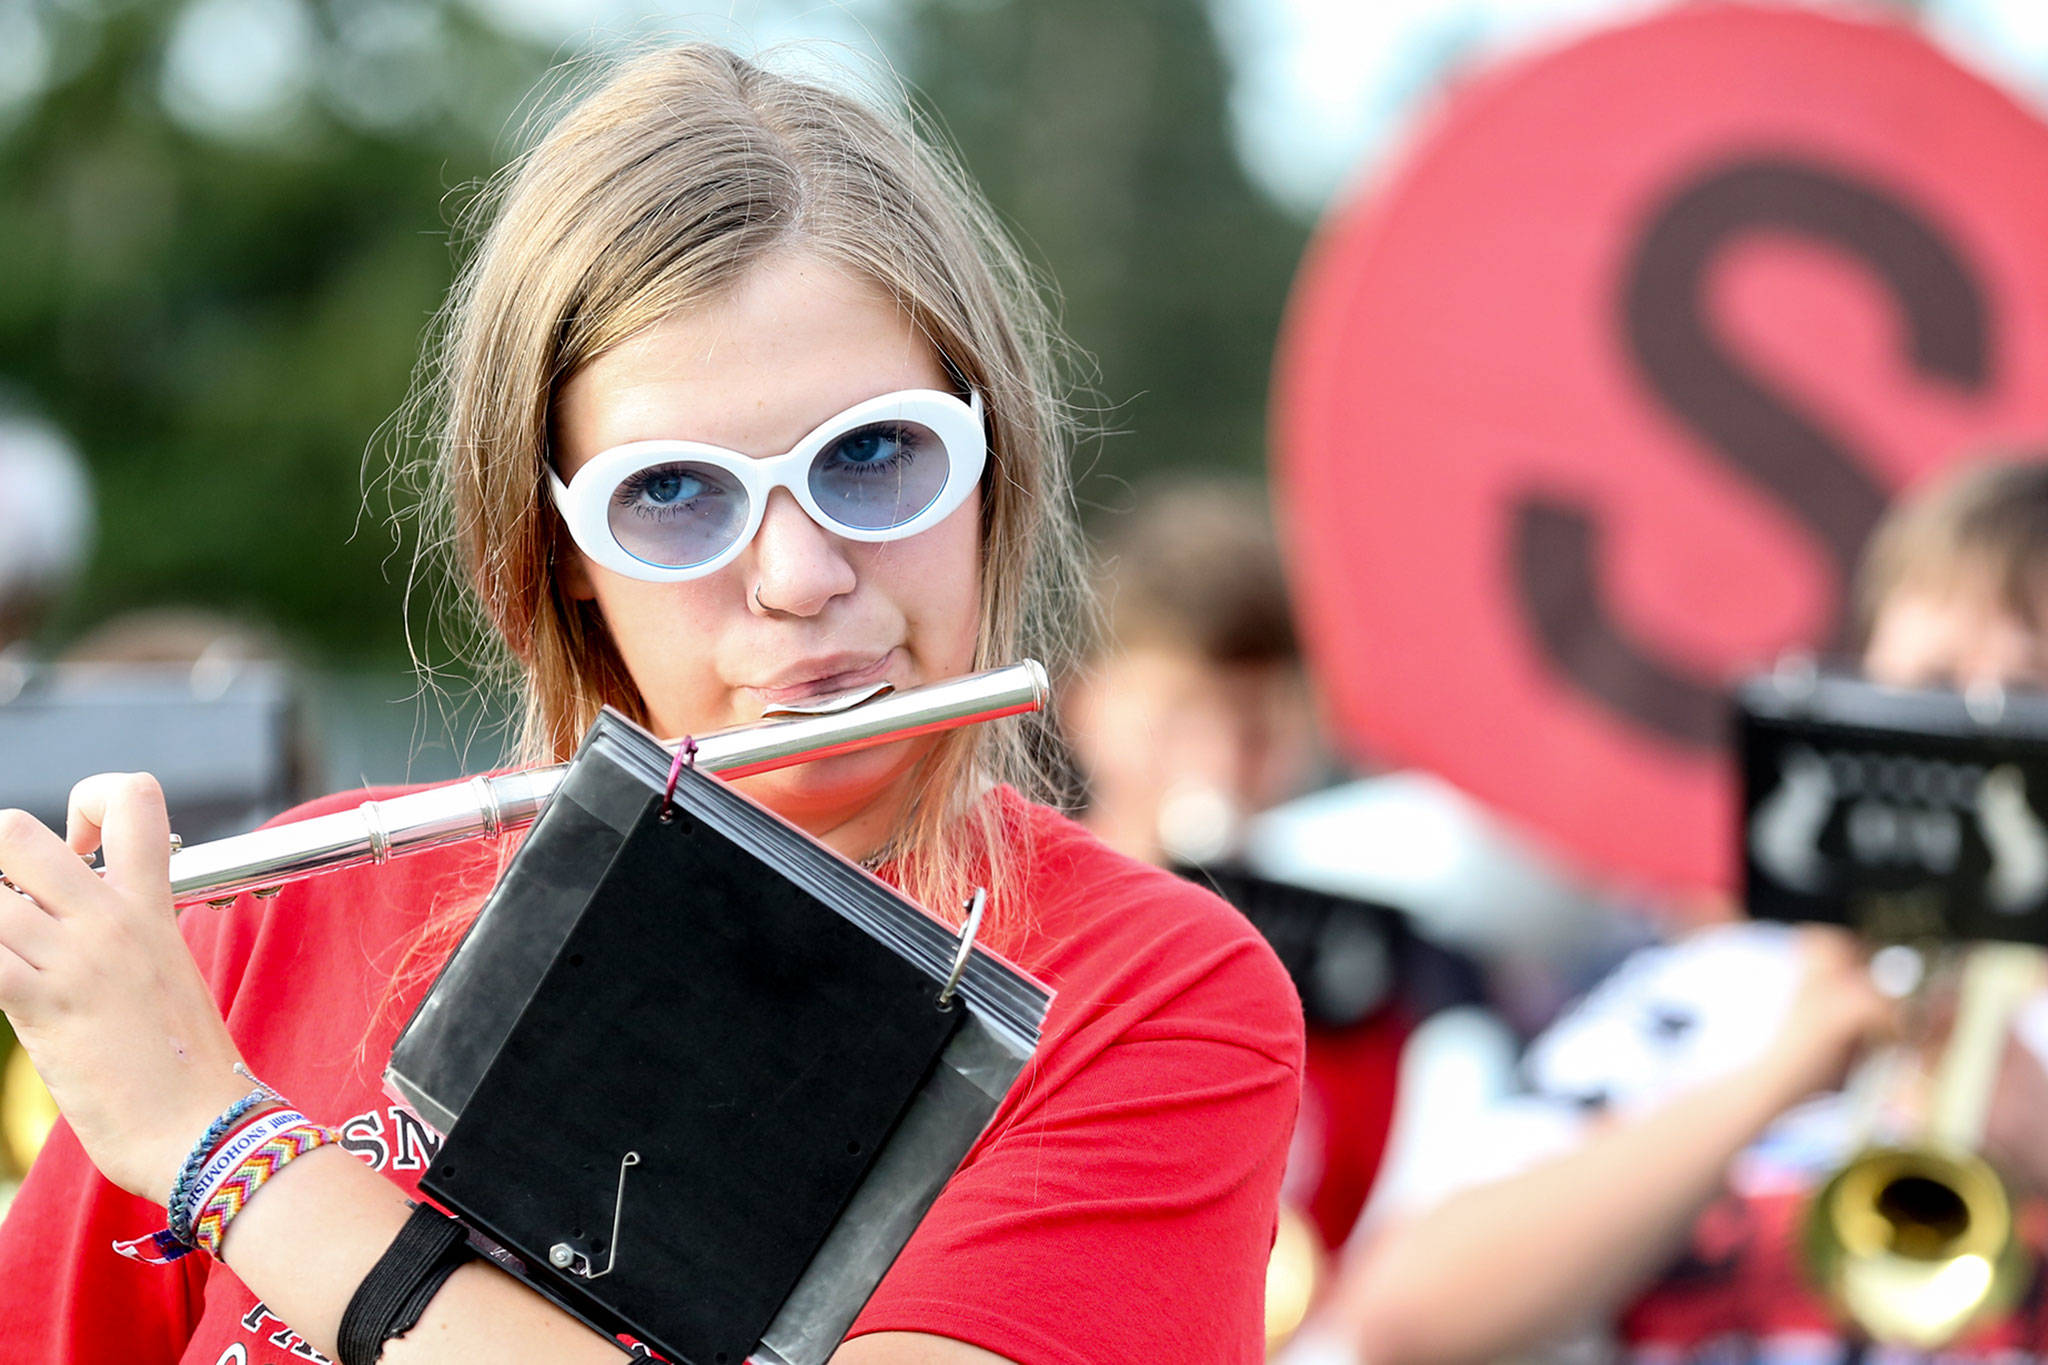 Camlin Vespaz plays her flute during practice Thursday evening at Snohomish High, in preparation for the first football game of the season. (Kevin Clark / The Herald)